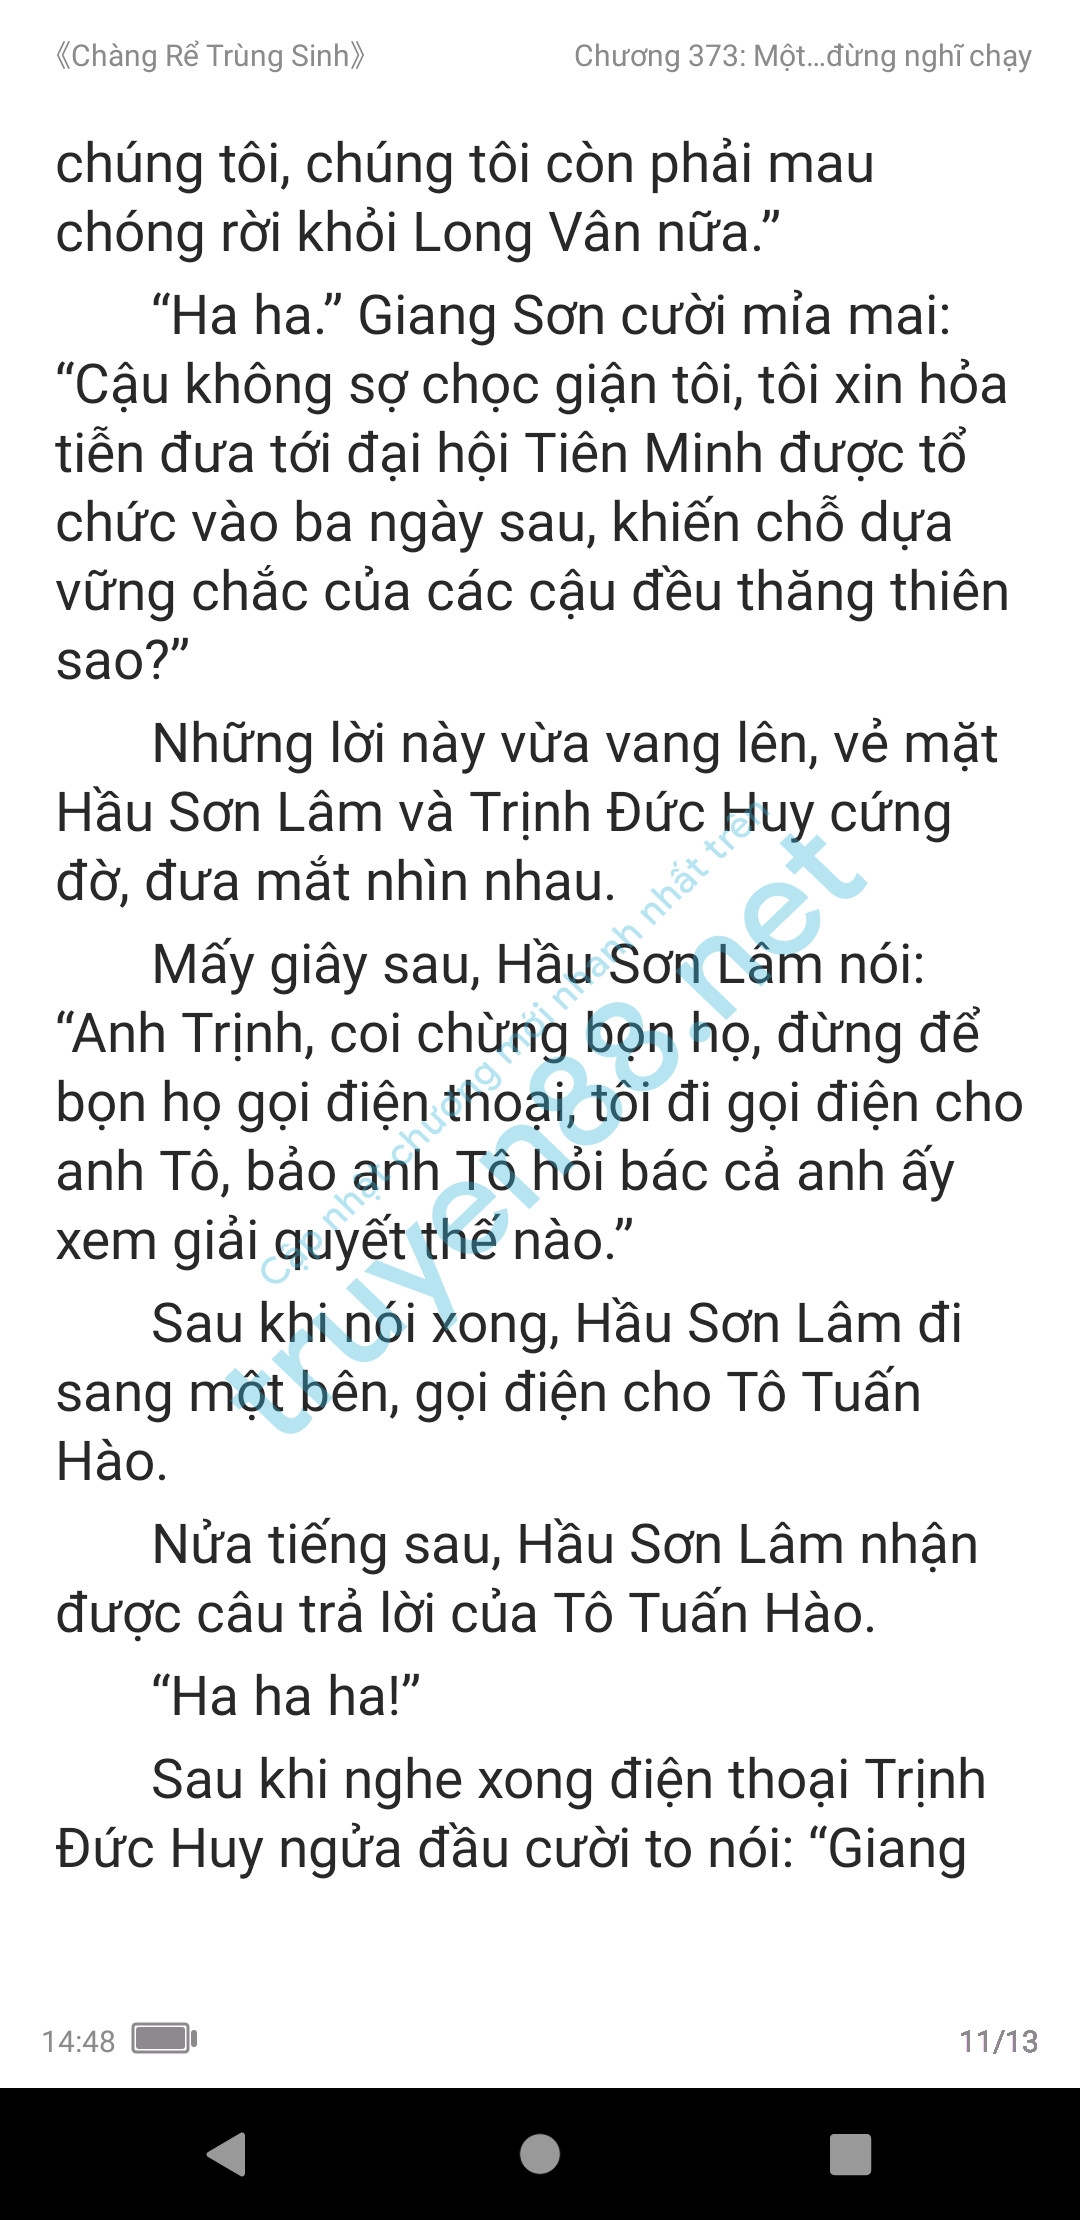 chang-re-trung-sinh-373-0